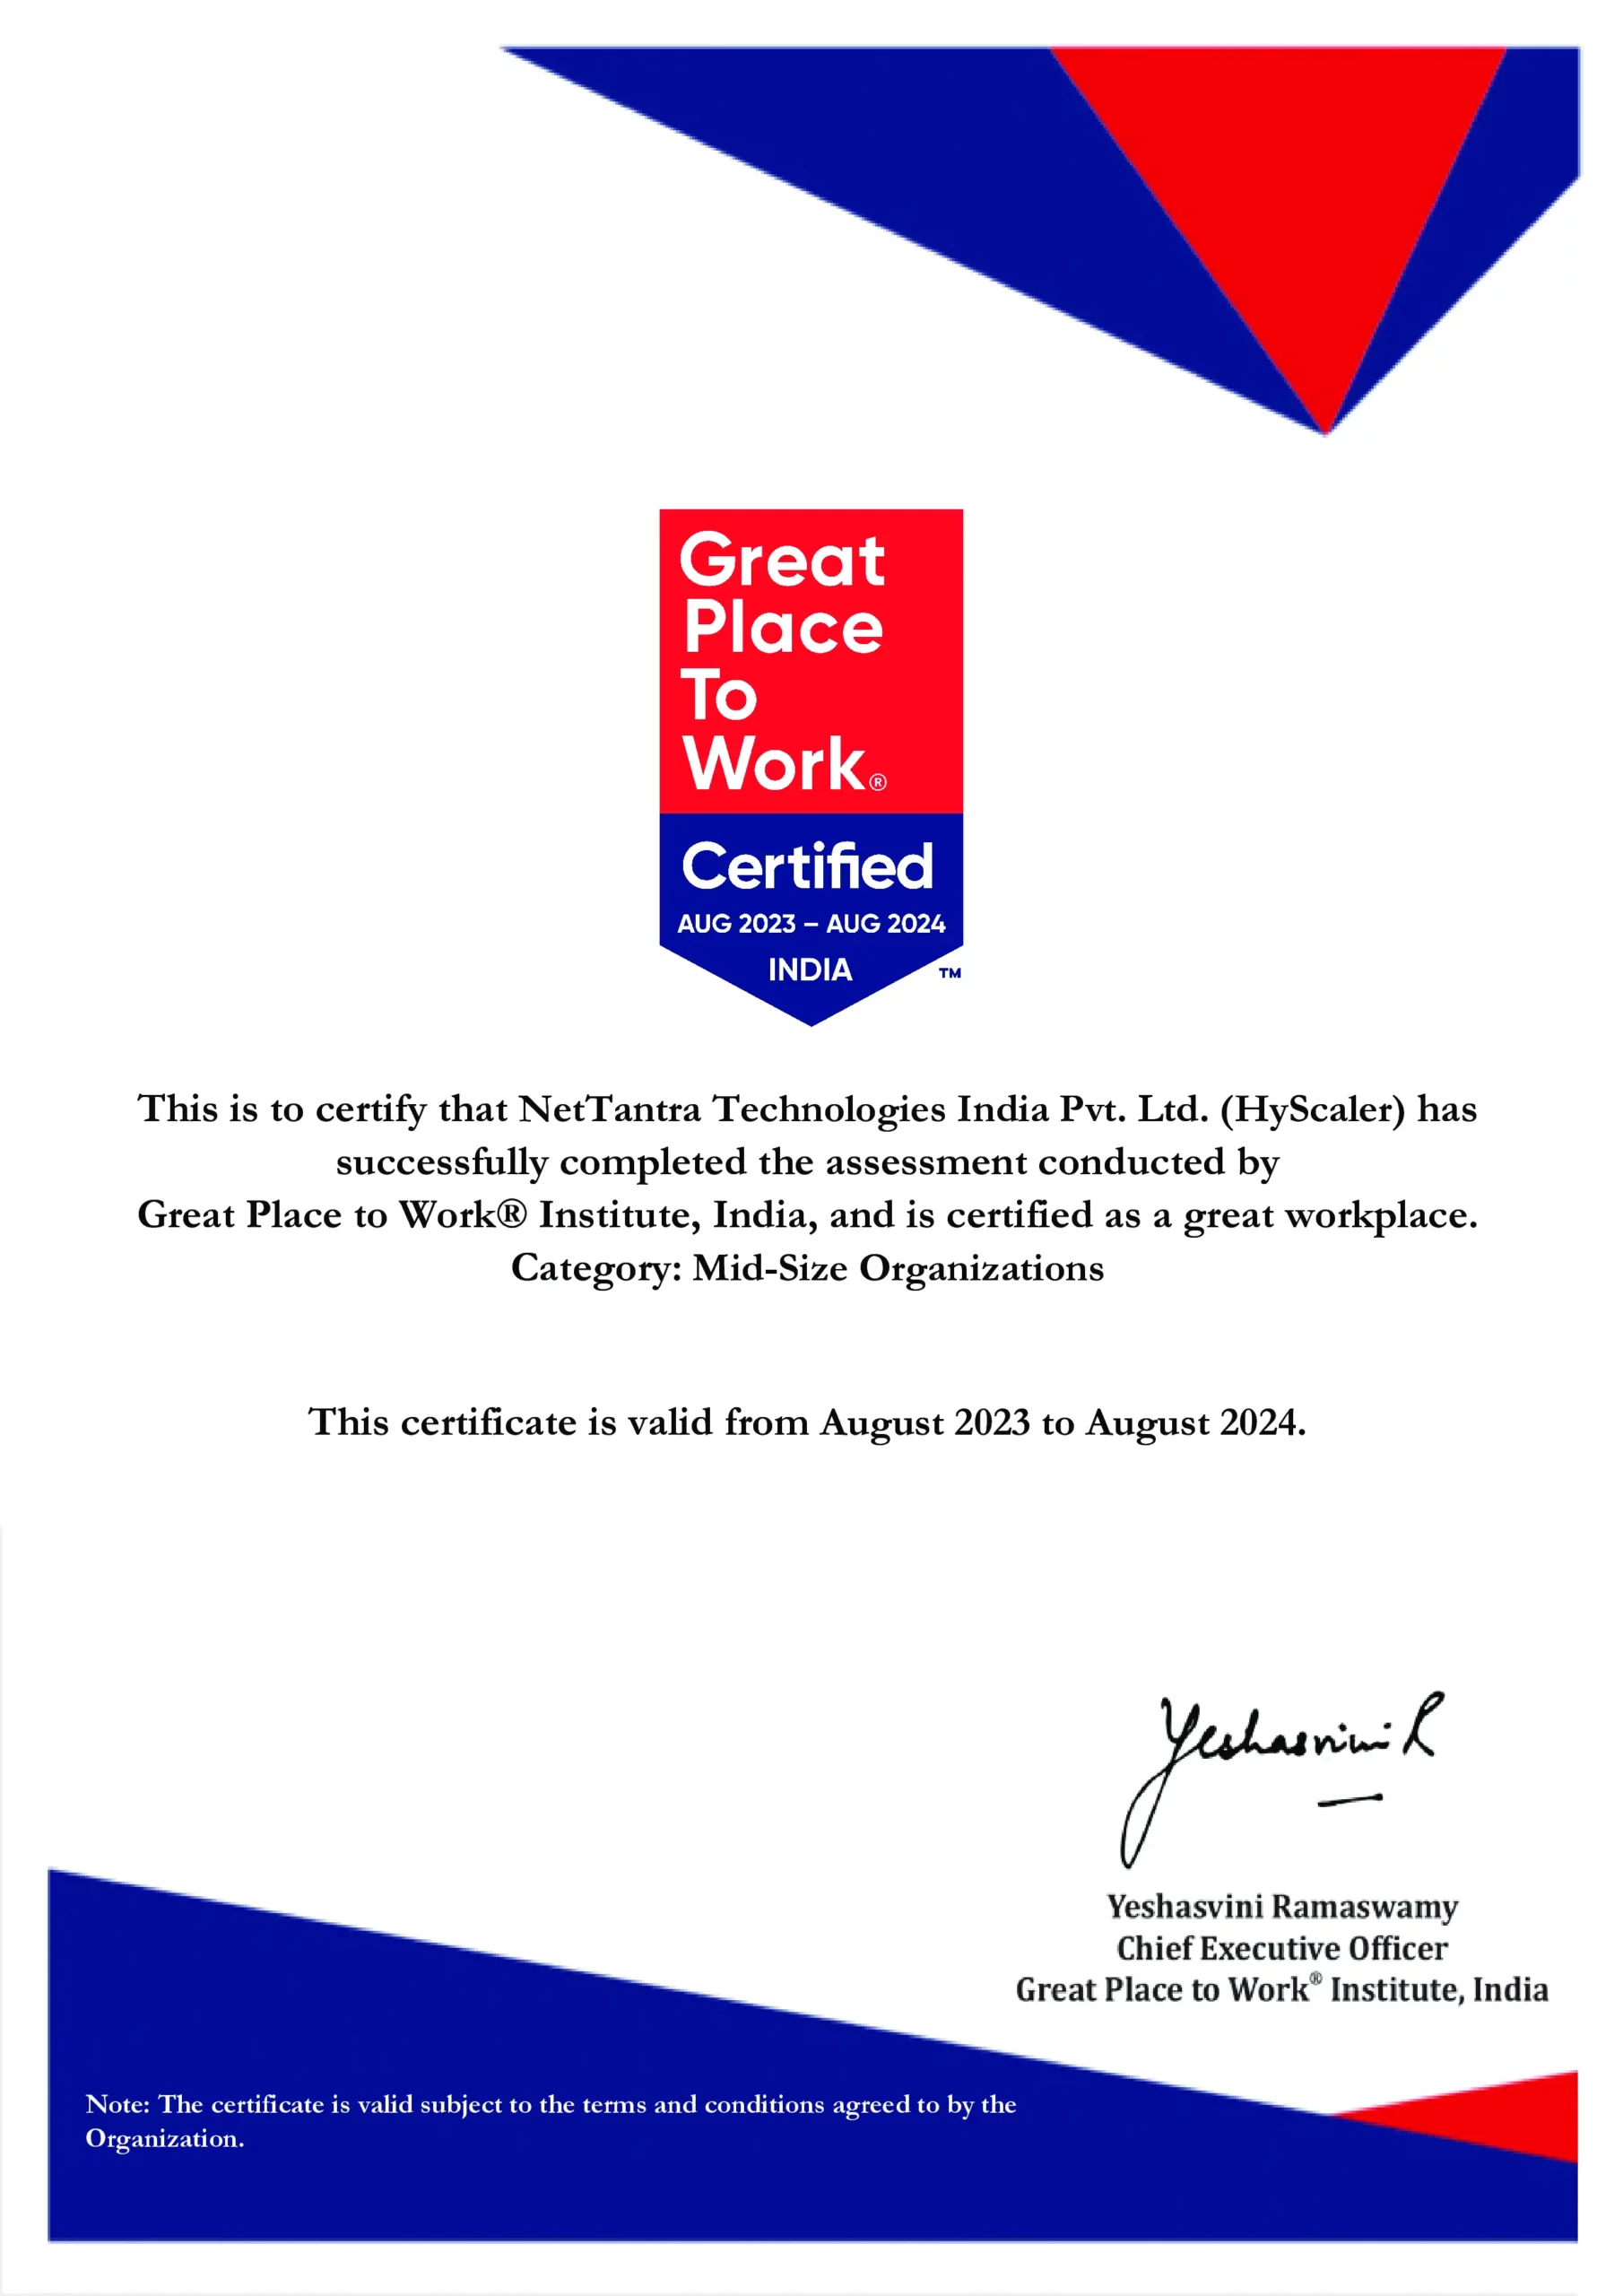 NetTantra - Great Place to Work Certification